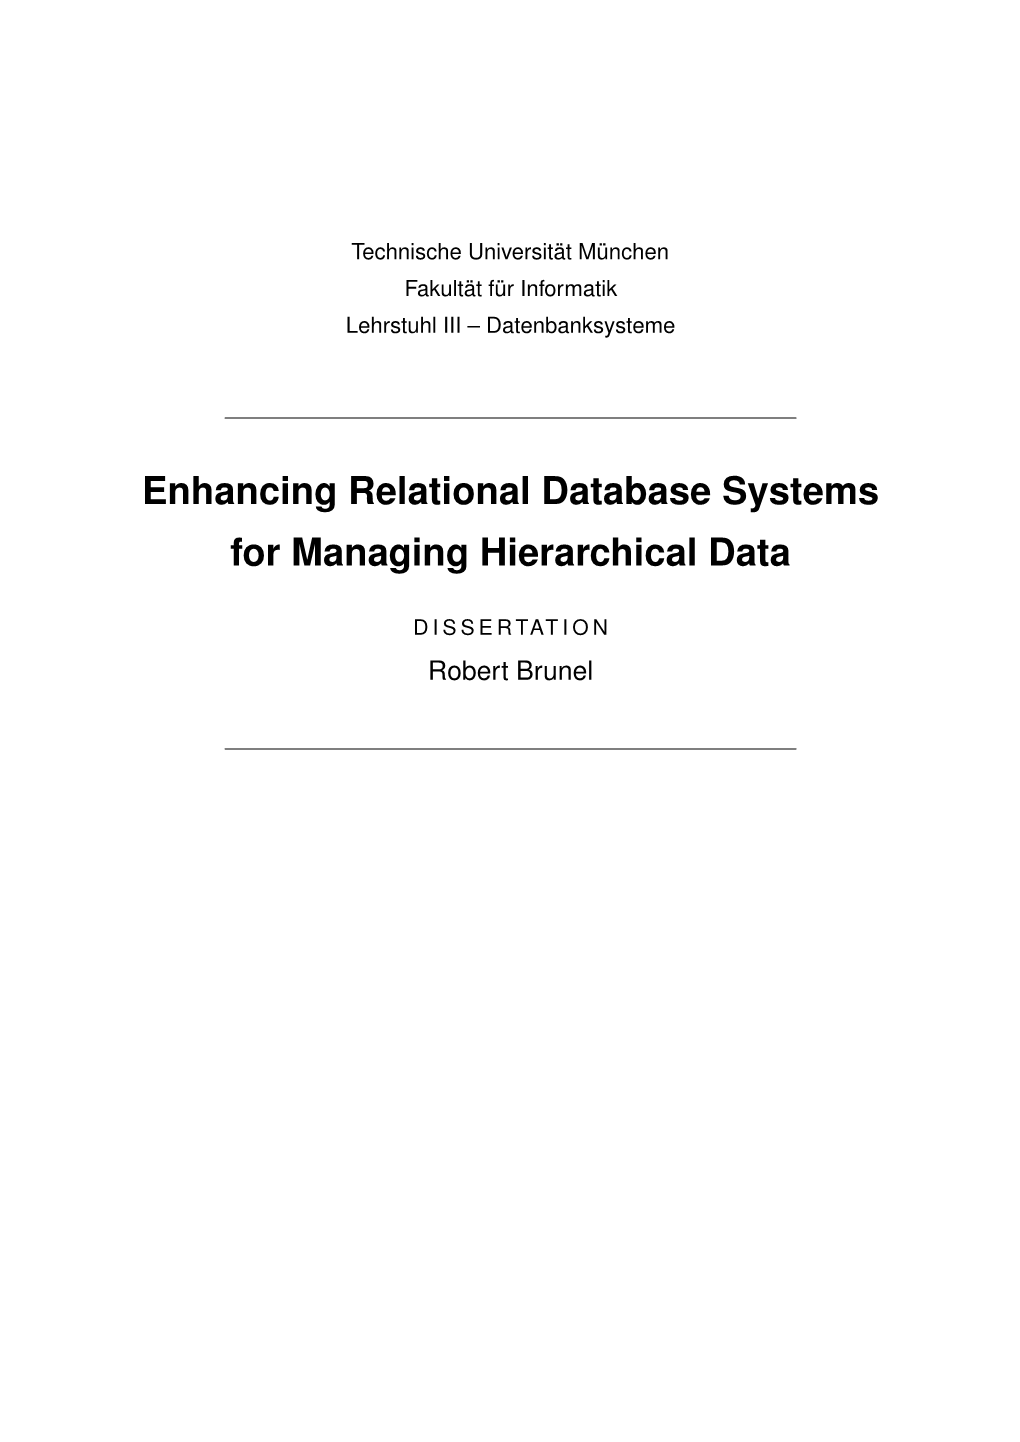 Enhancing Relational Database Systems for Managing Hierarchical Data